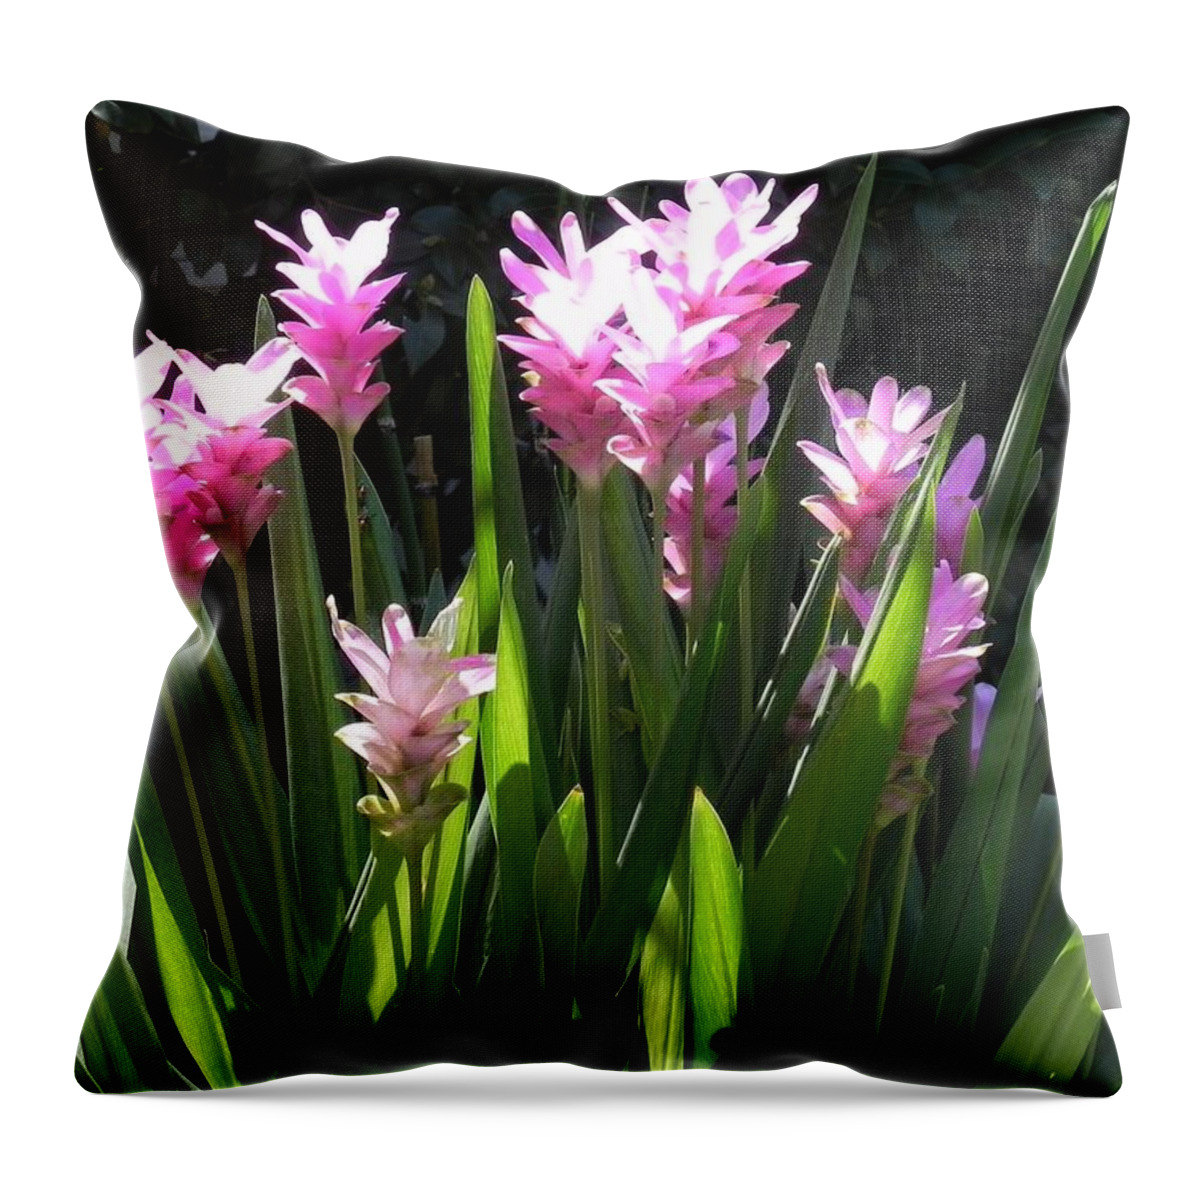 Goner In Bloom Throw Pillow featuring the photograph Ginger Is A Complete Surprise In Bloom by Patricia Greer